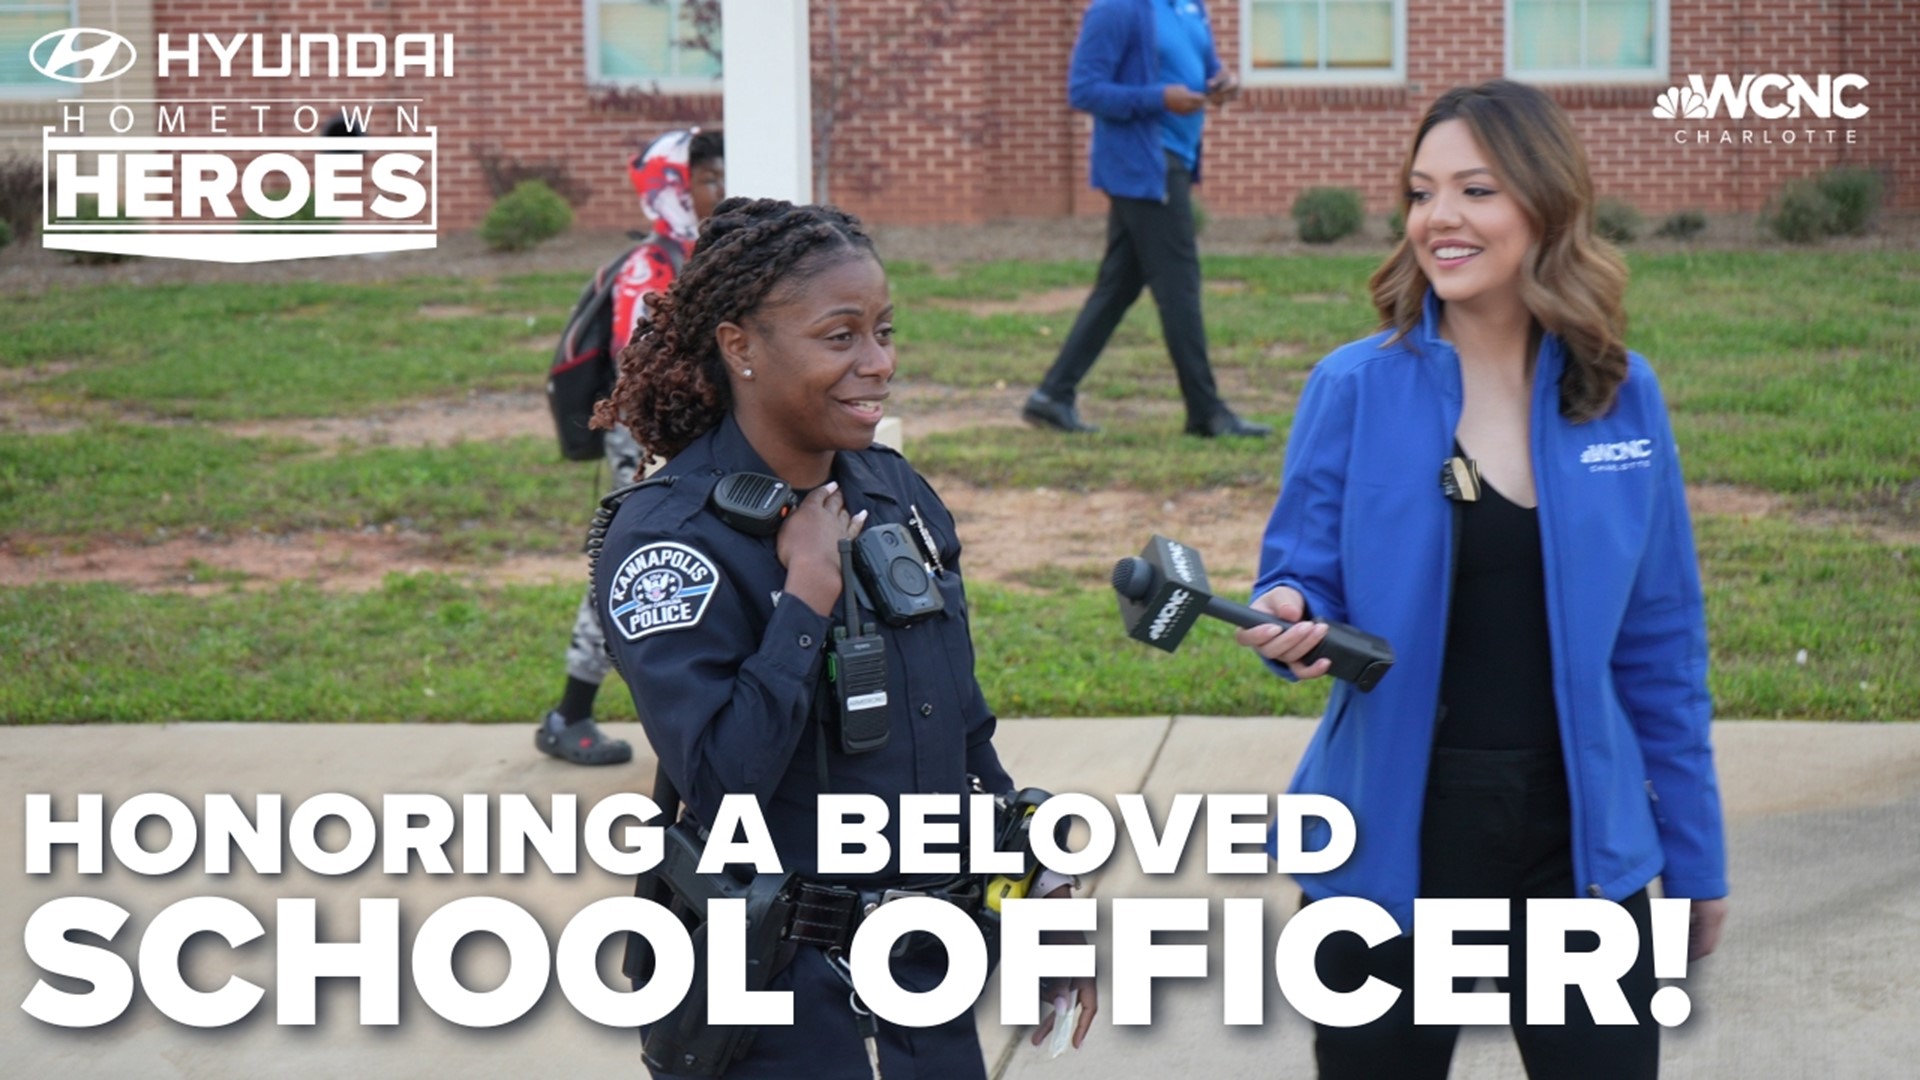 WCNC Charlotte honors a beloved officer who goes above and beyond for the students she serves!